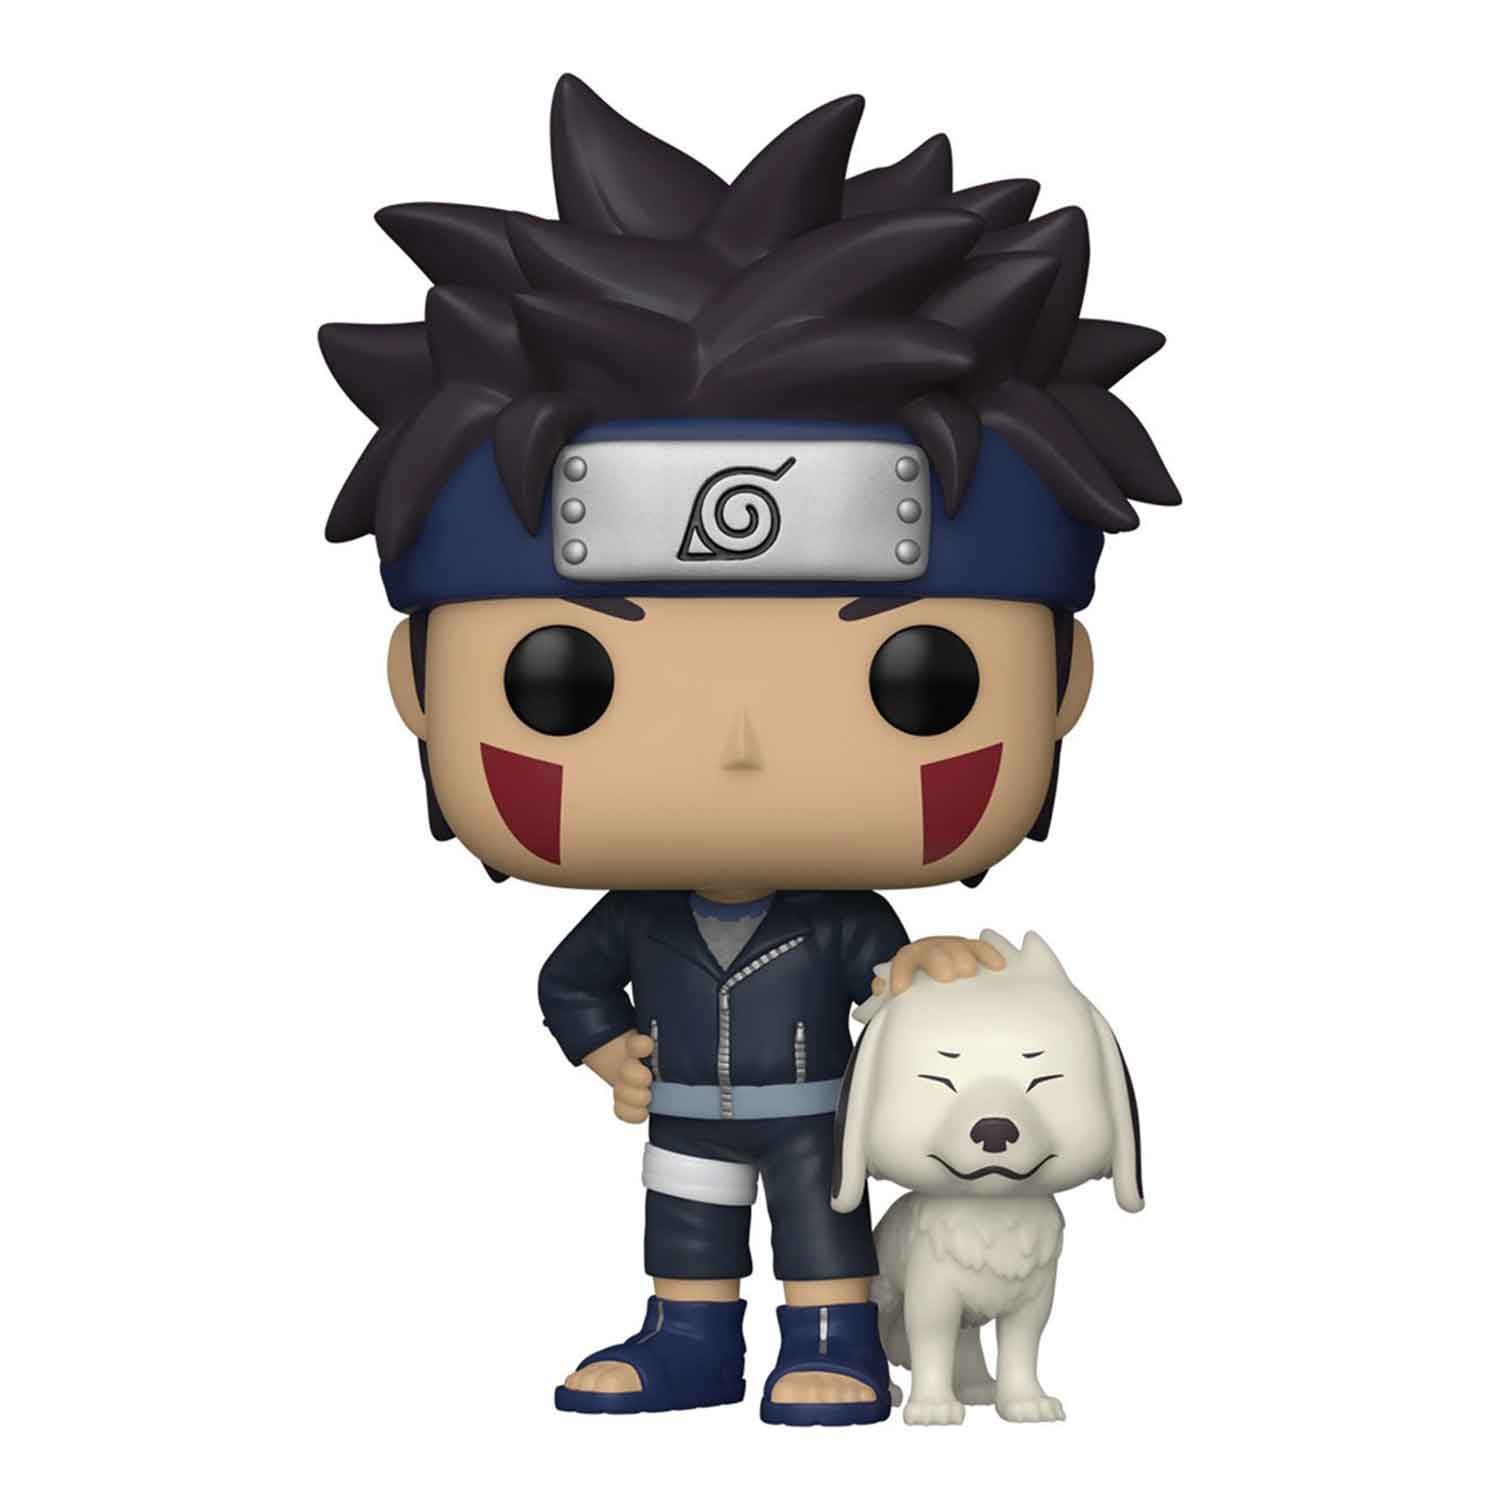 Naruto Pop-Up Shop Features Characters in East Asian Outfits